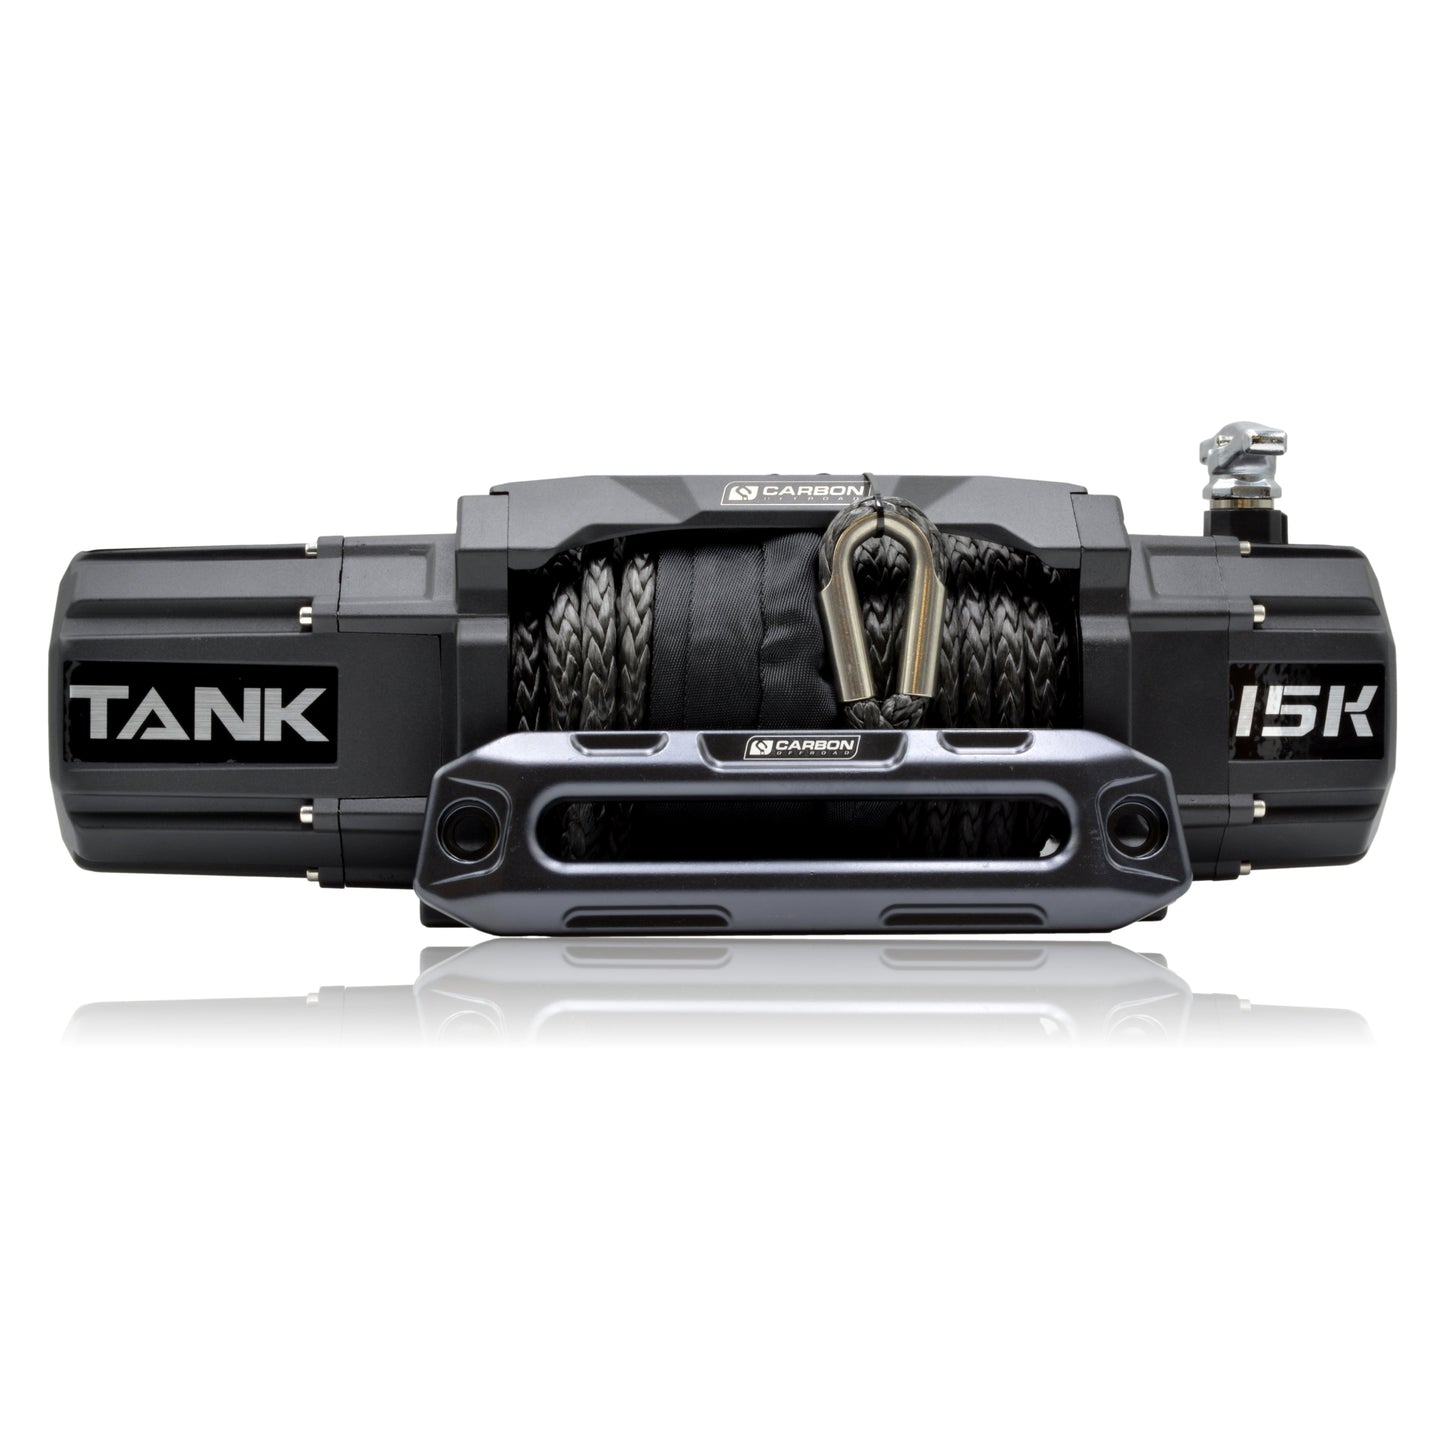 Carbon Tank 15000lb 4x4 Winch Kit IP68 12V and Recovery Combo Deal - CW-TK15-COMBO2 7